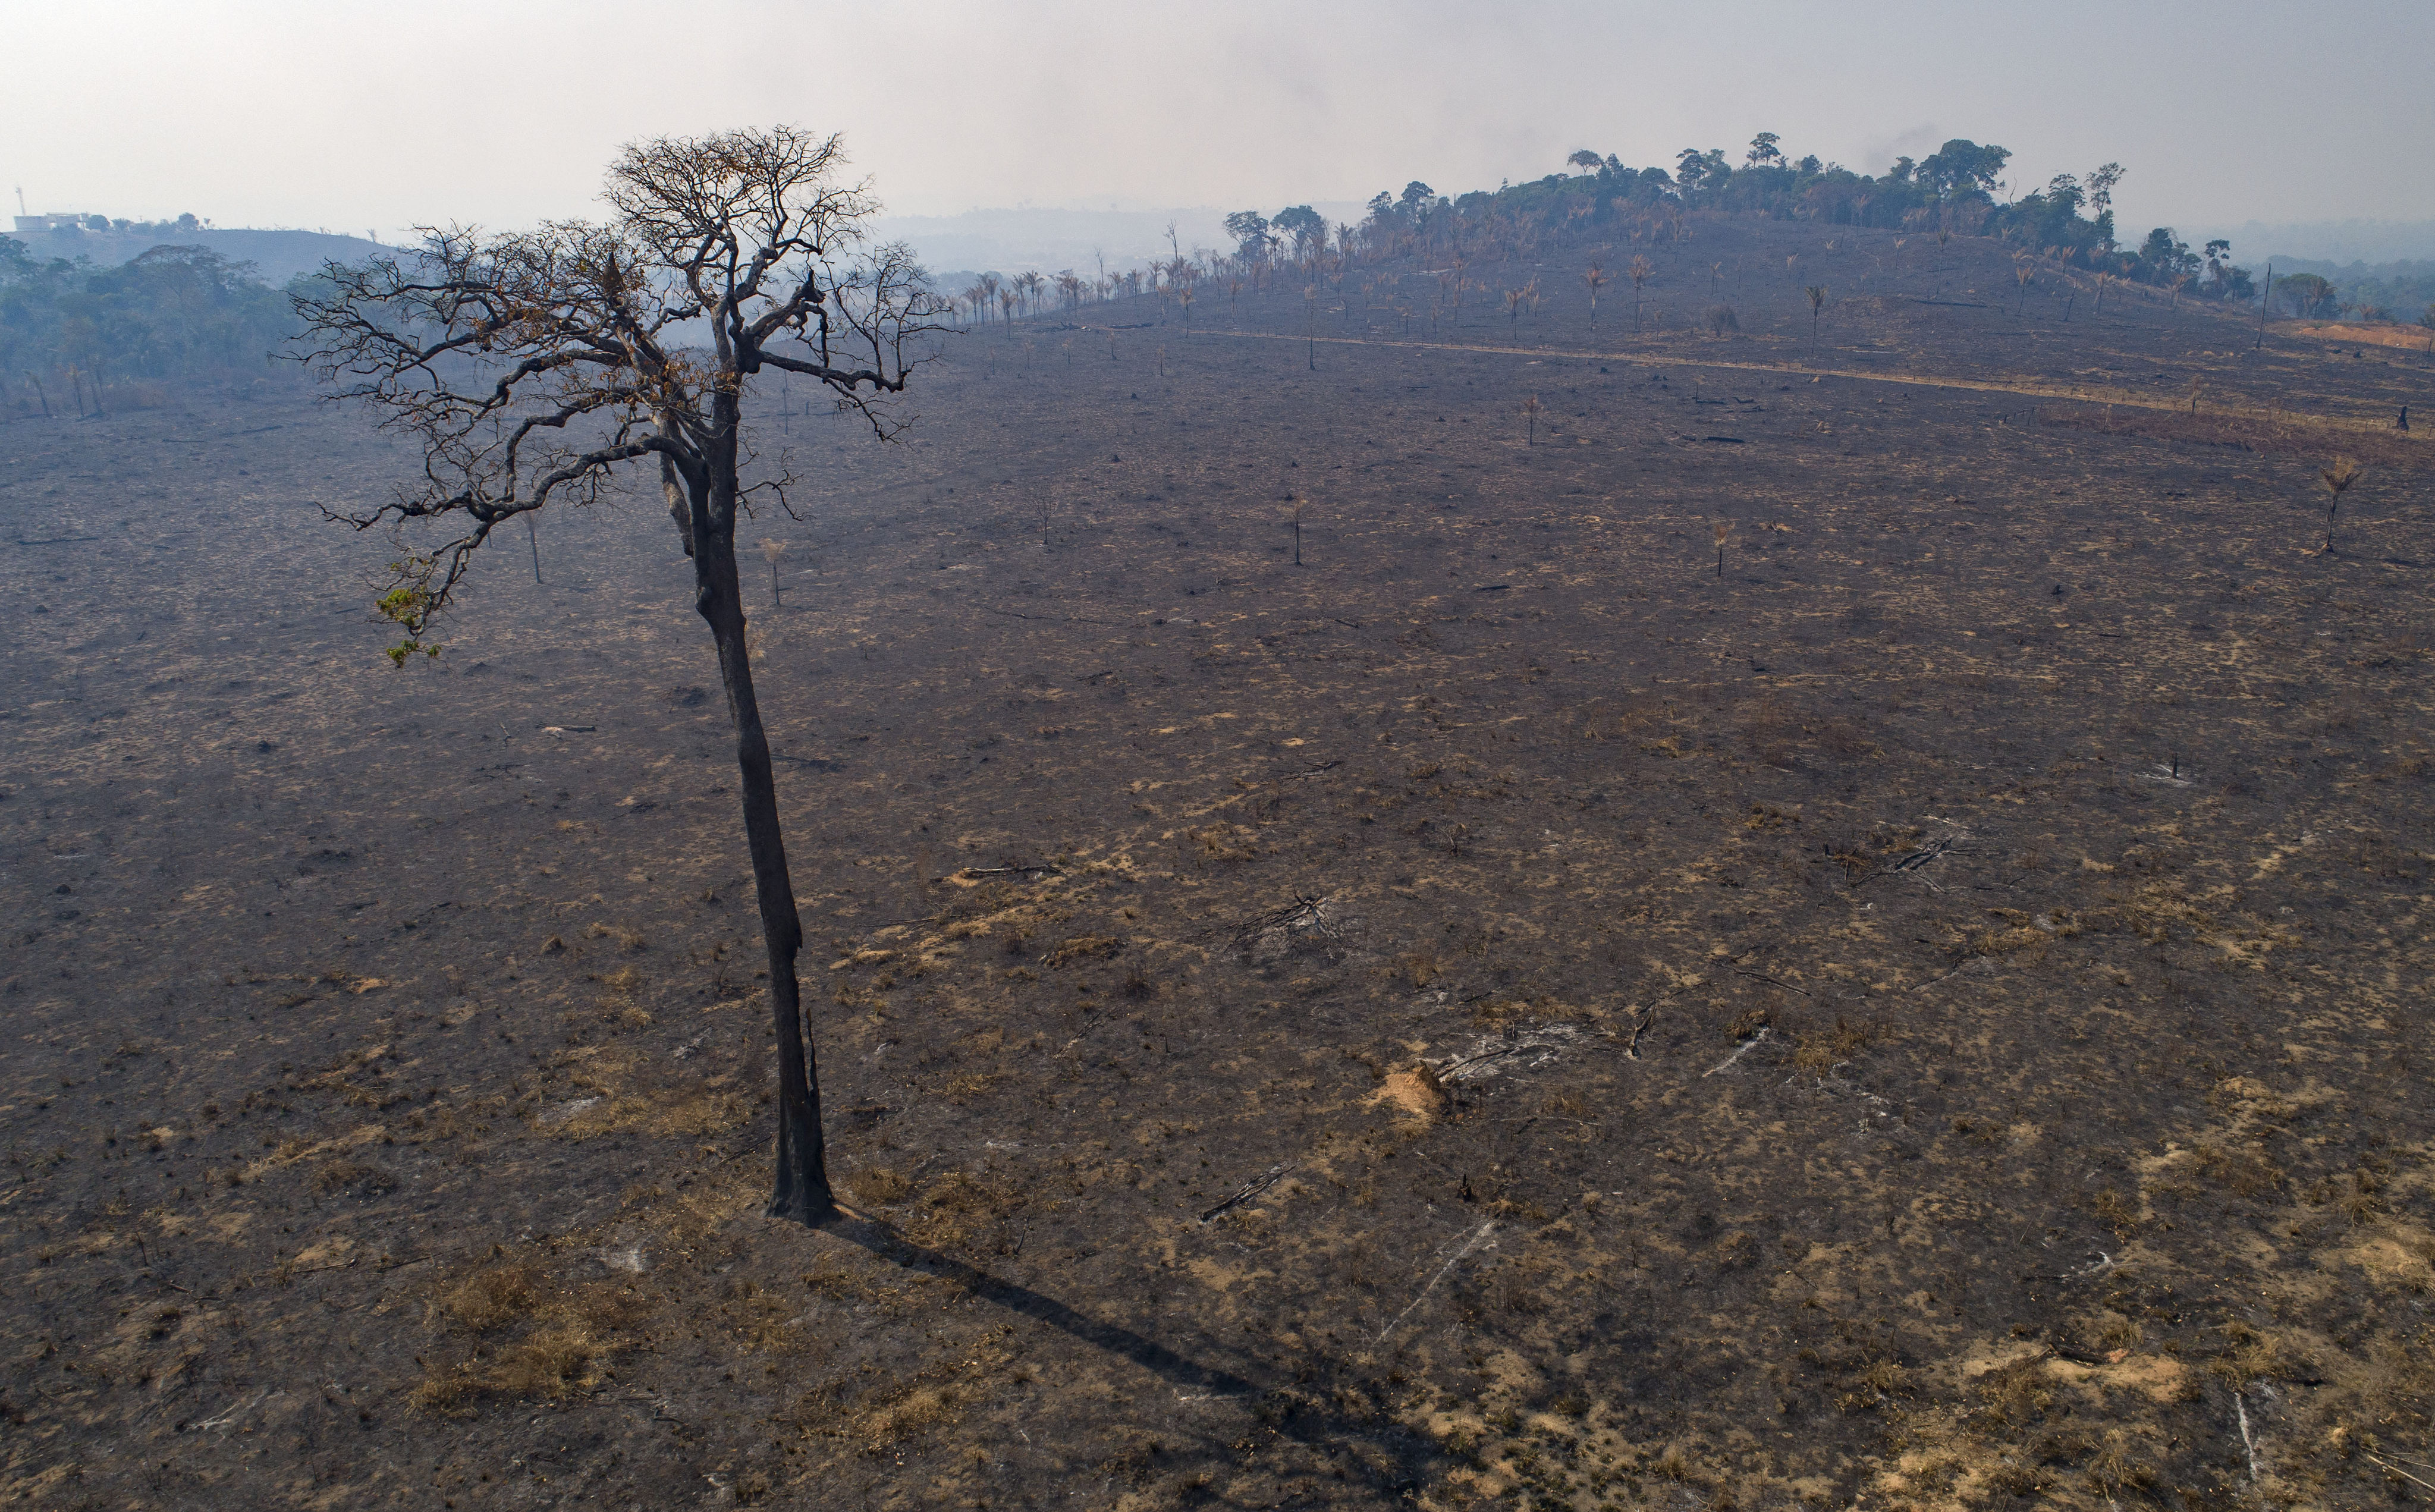  Land recently burned and deforested by cattle farmers stands empty near Novo Progresso, Para state, Brazil. Photo: AP/File